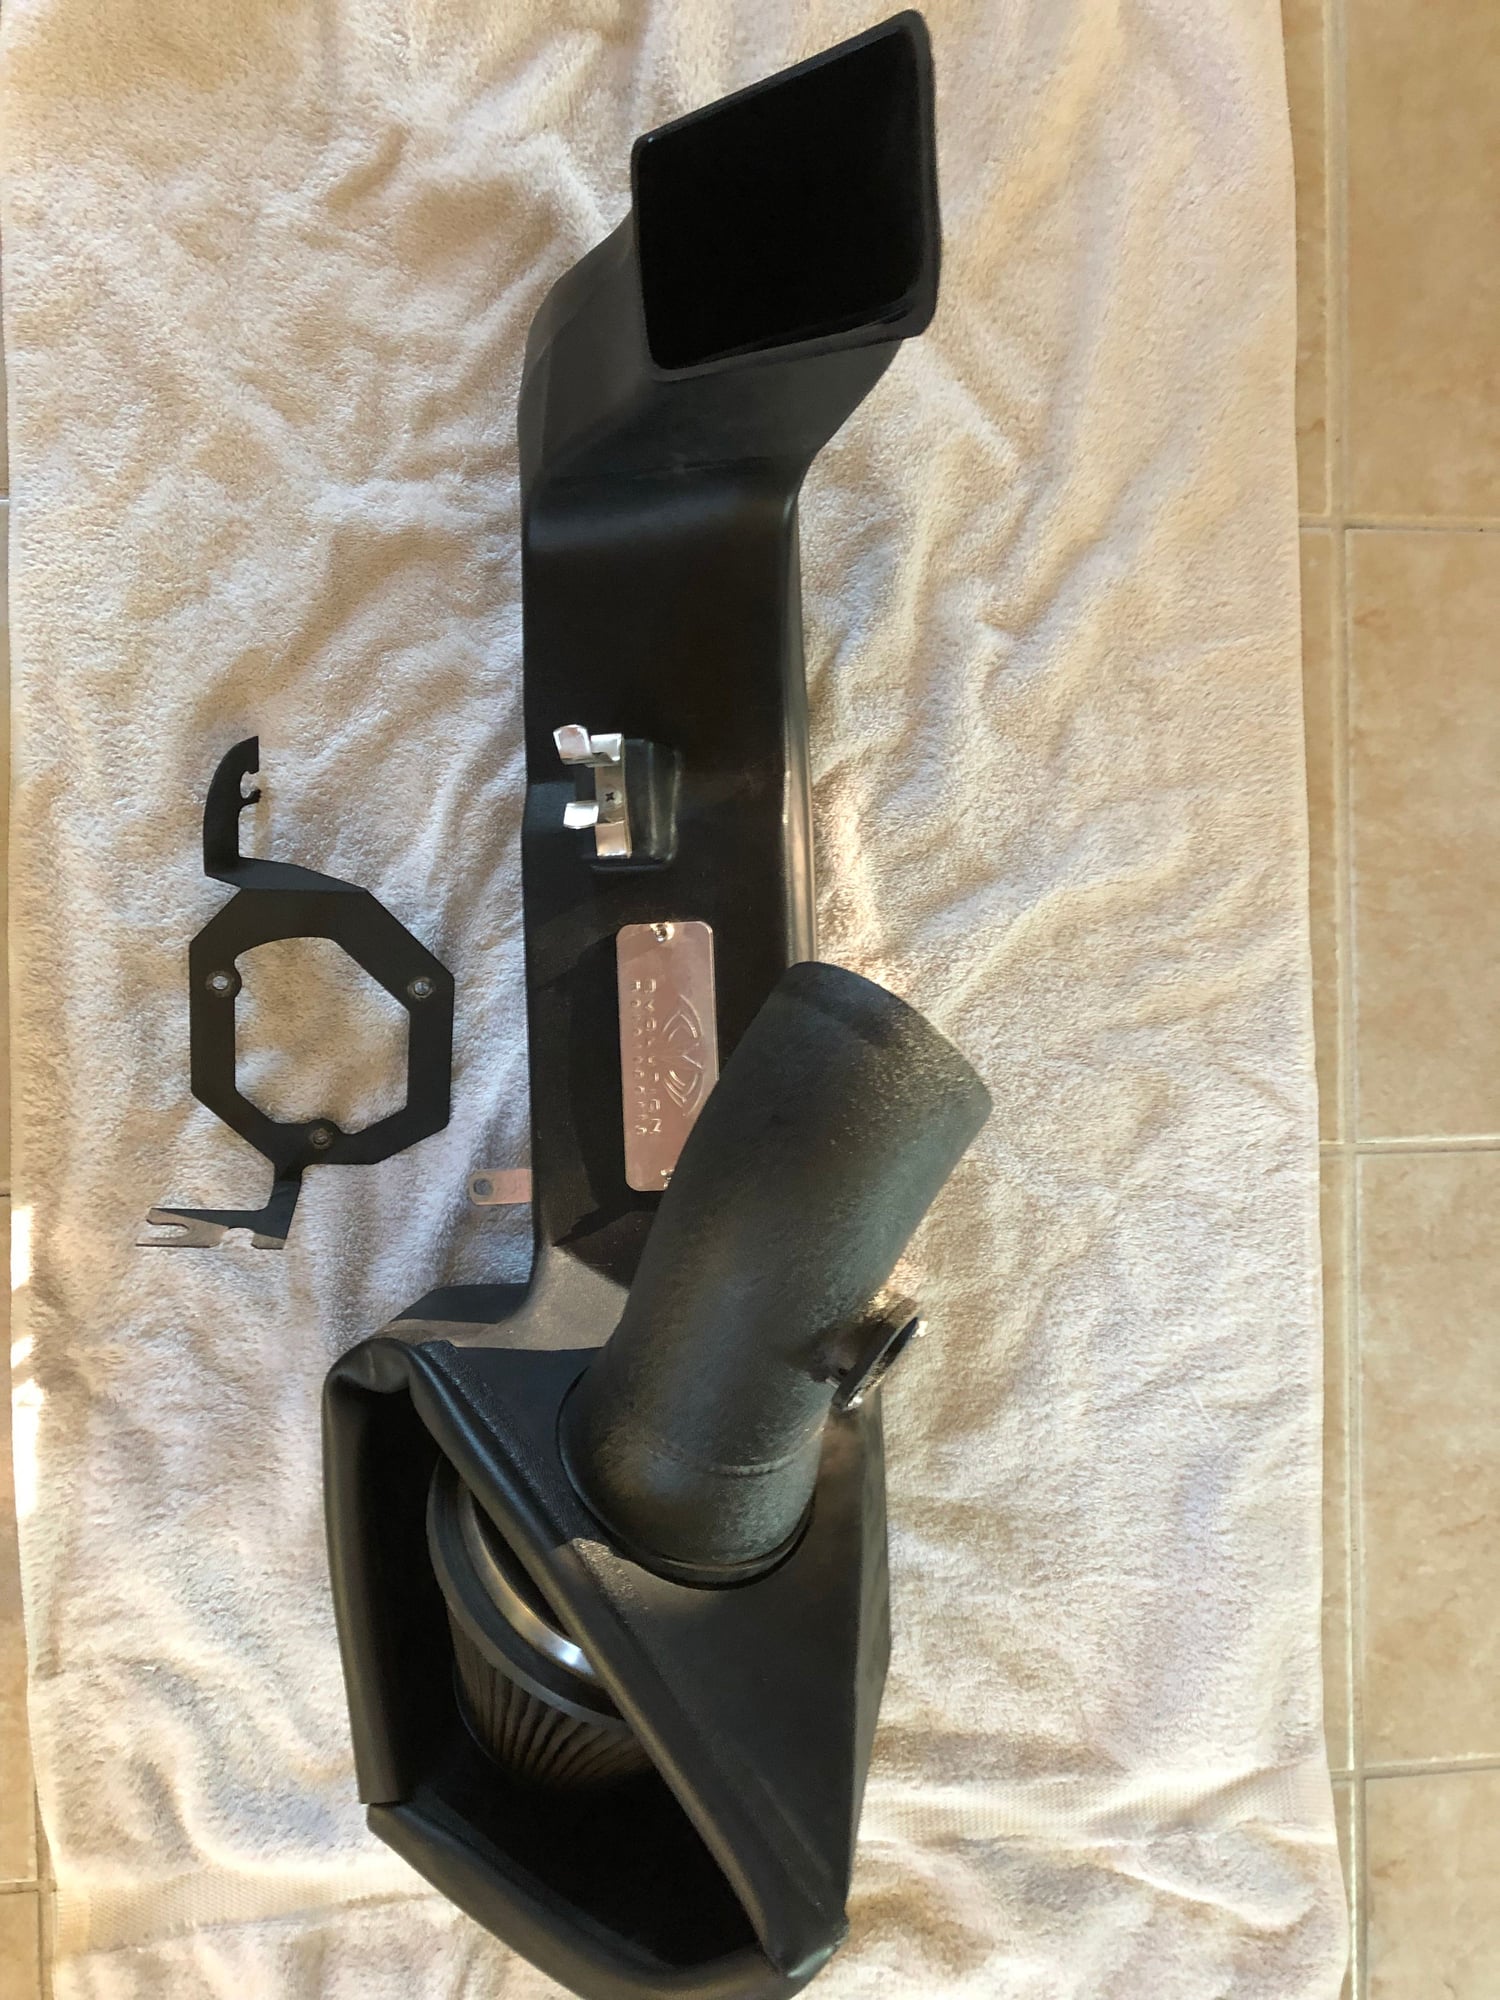 Engine - Intake/Fuel - Evolution Motorsports Airbox for 996 - Used - 1999 to 2004 Porsche Carrera - Fresno, CA 93720, United States